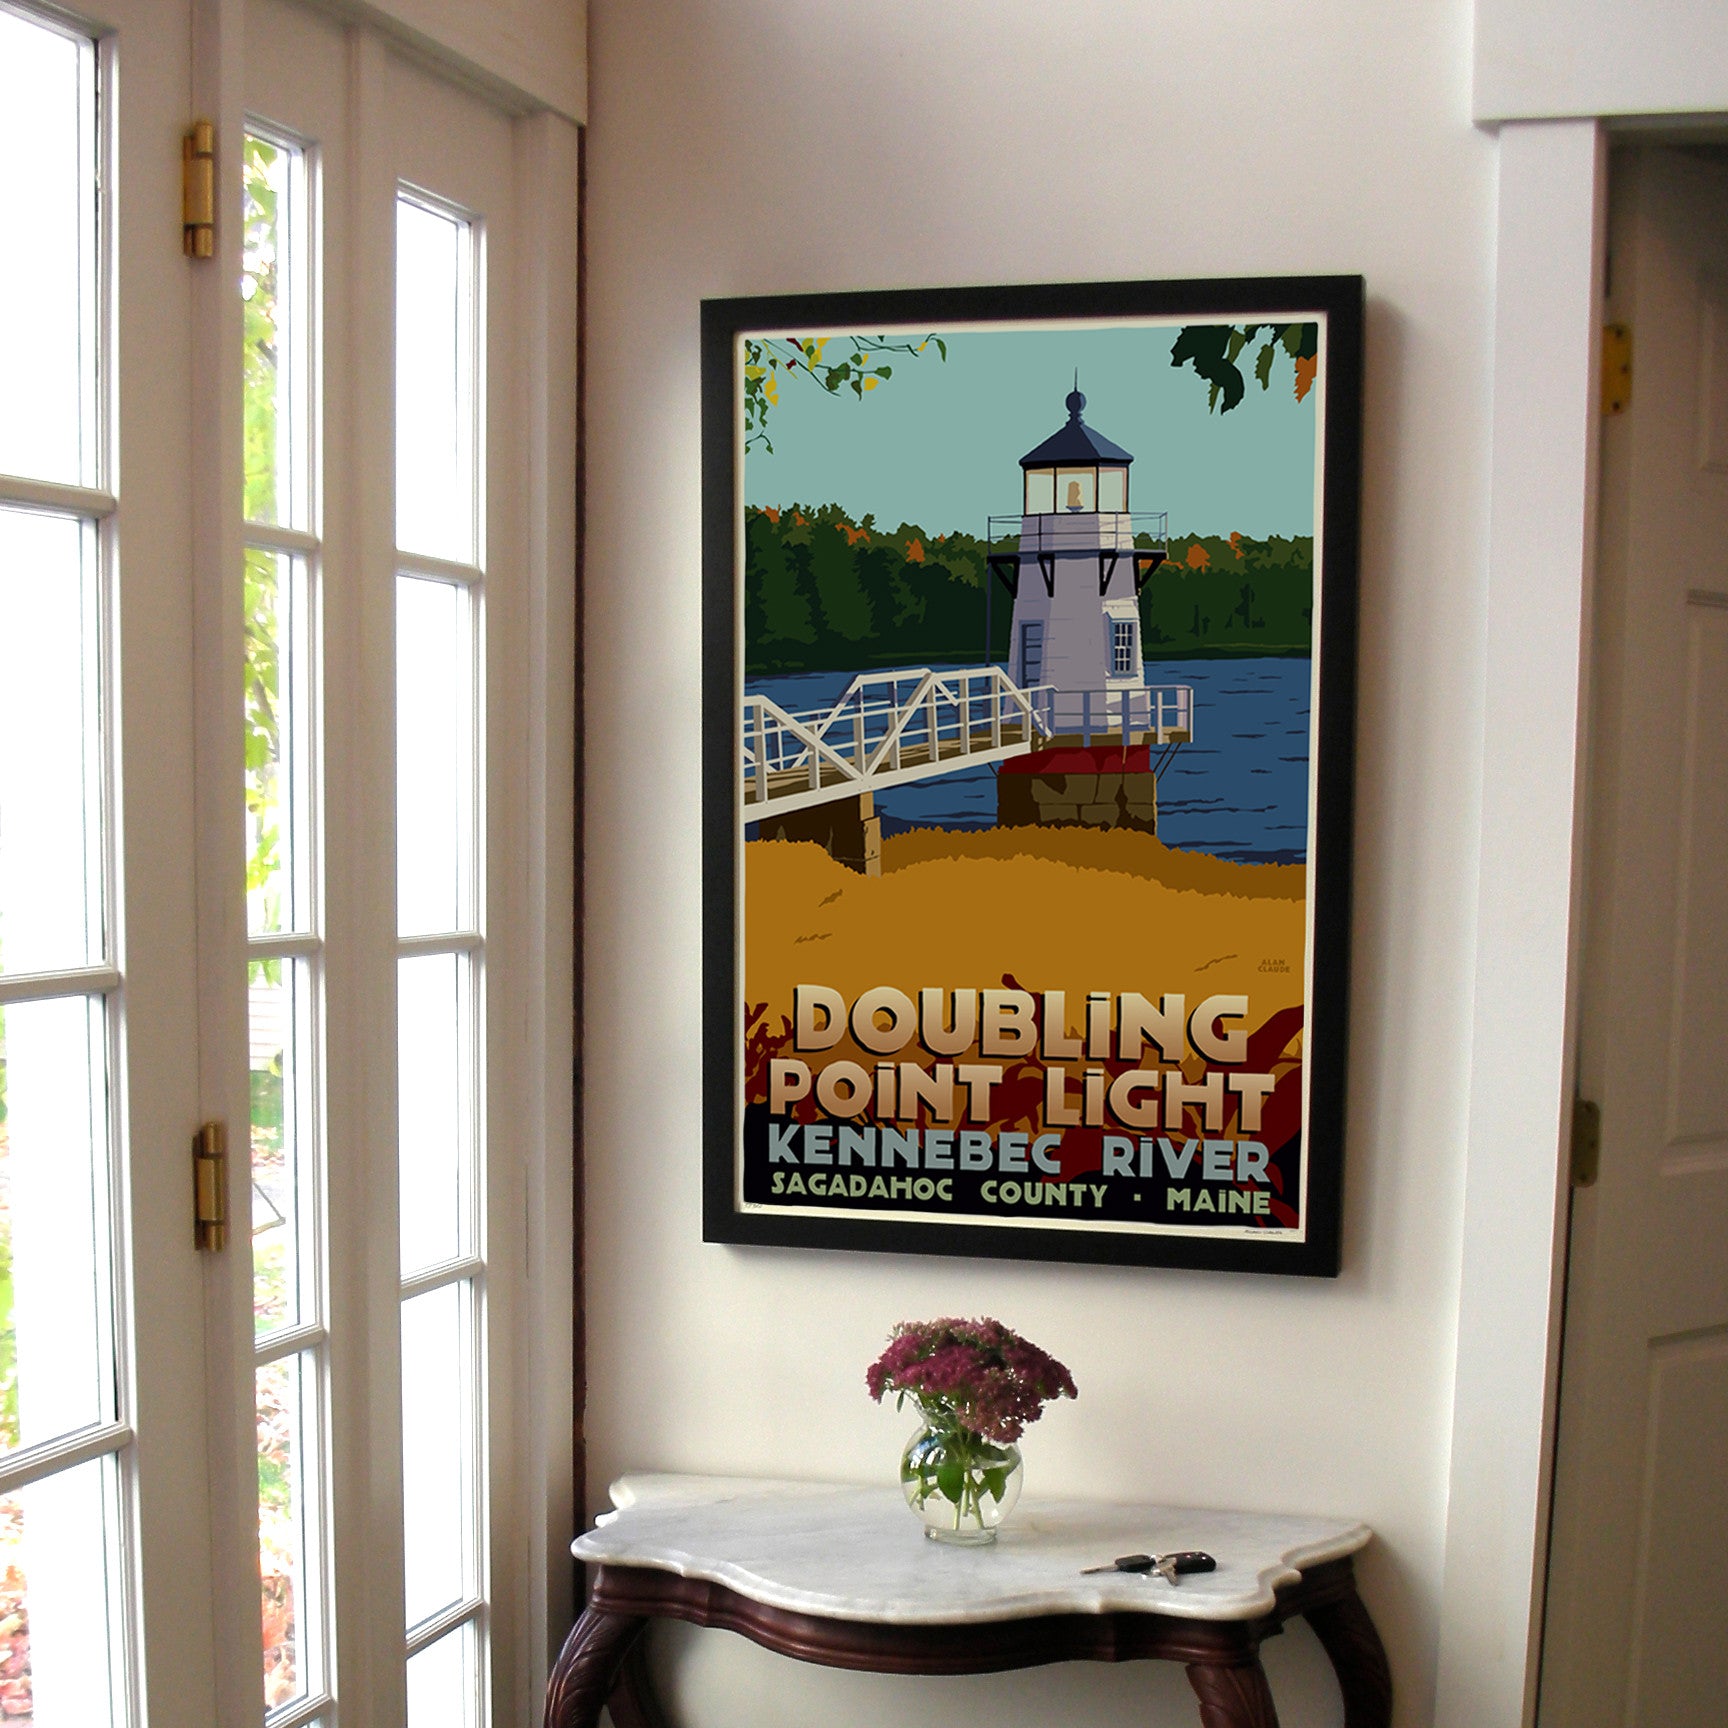 Doubling Point Light Art Print 24" x 36" Framed Travel Poster By Alan Claude  - Maine